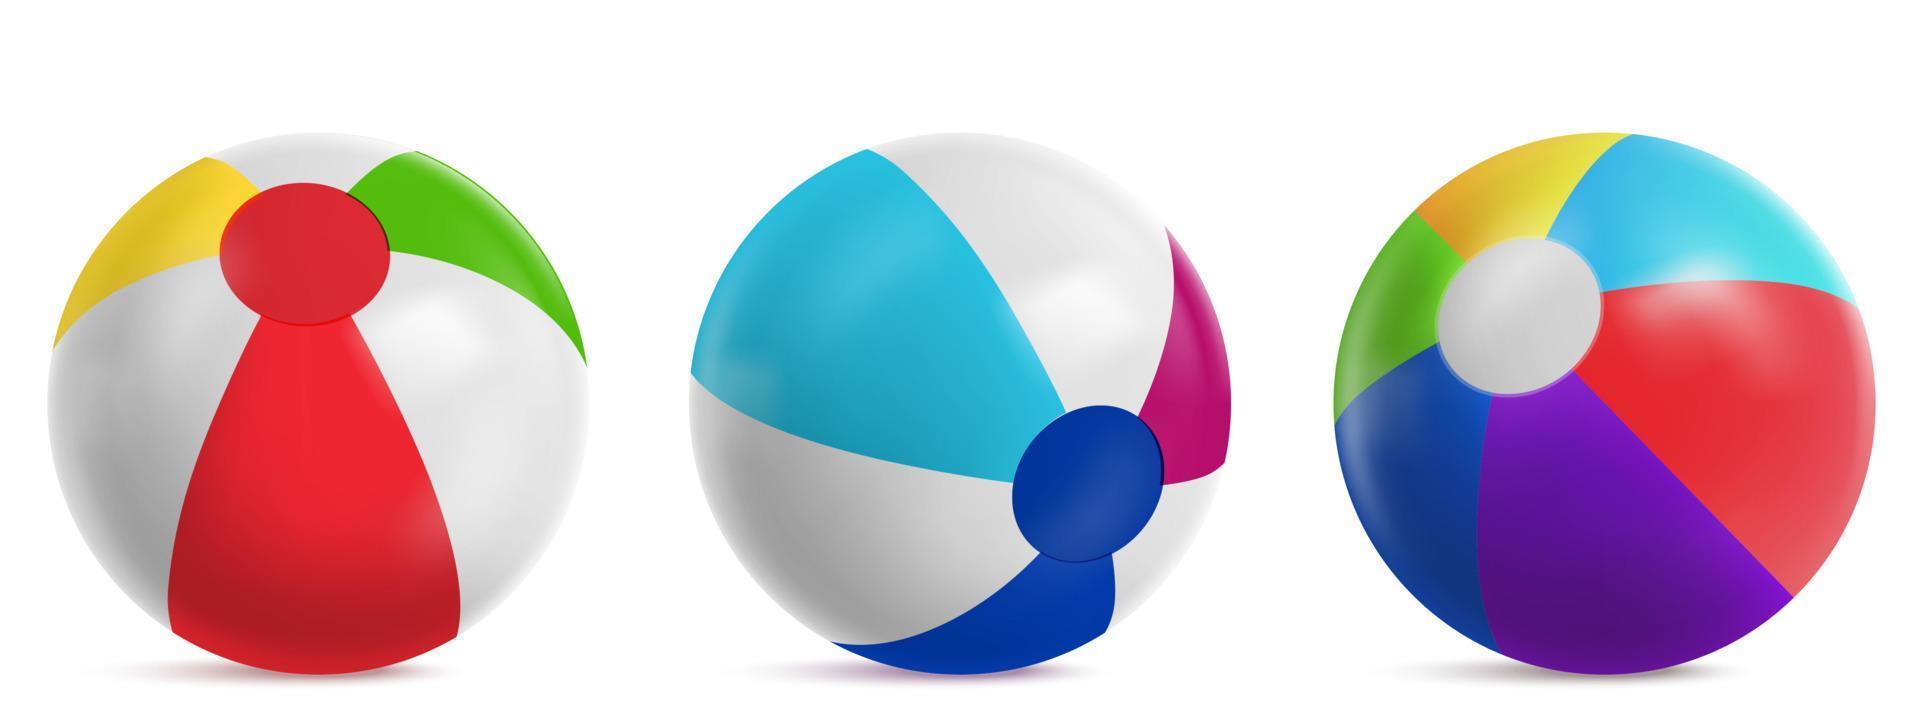 Inflatable beach balls for play in water vector